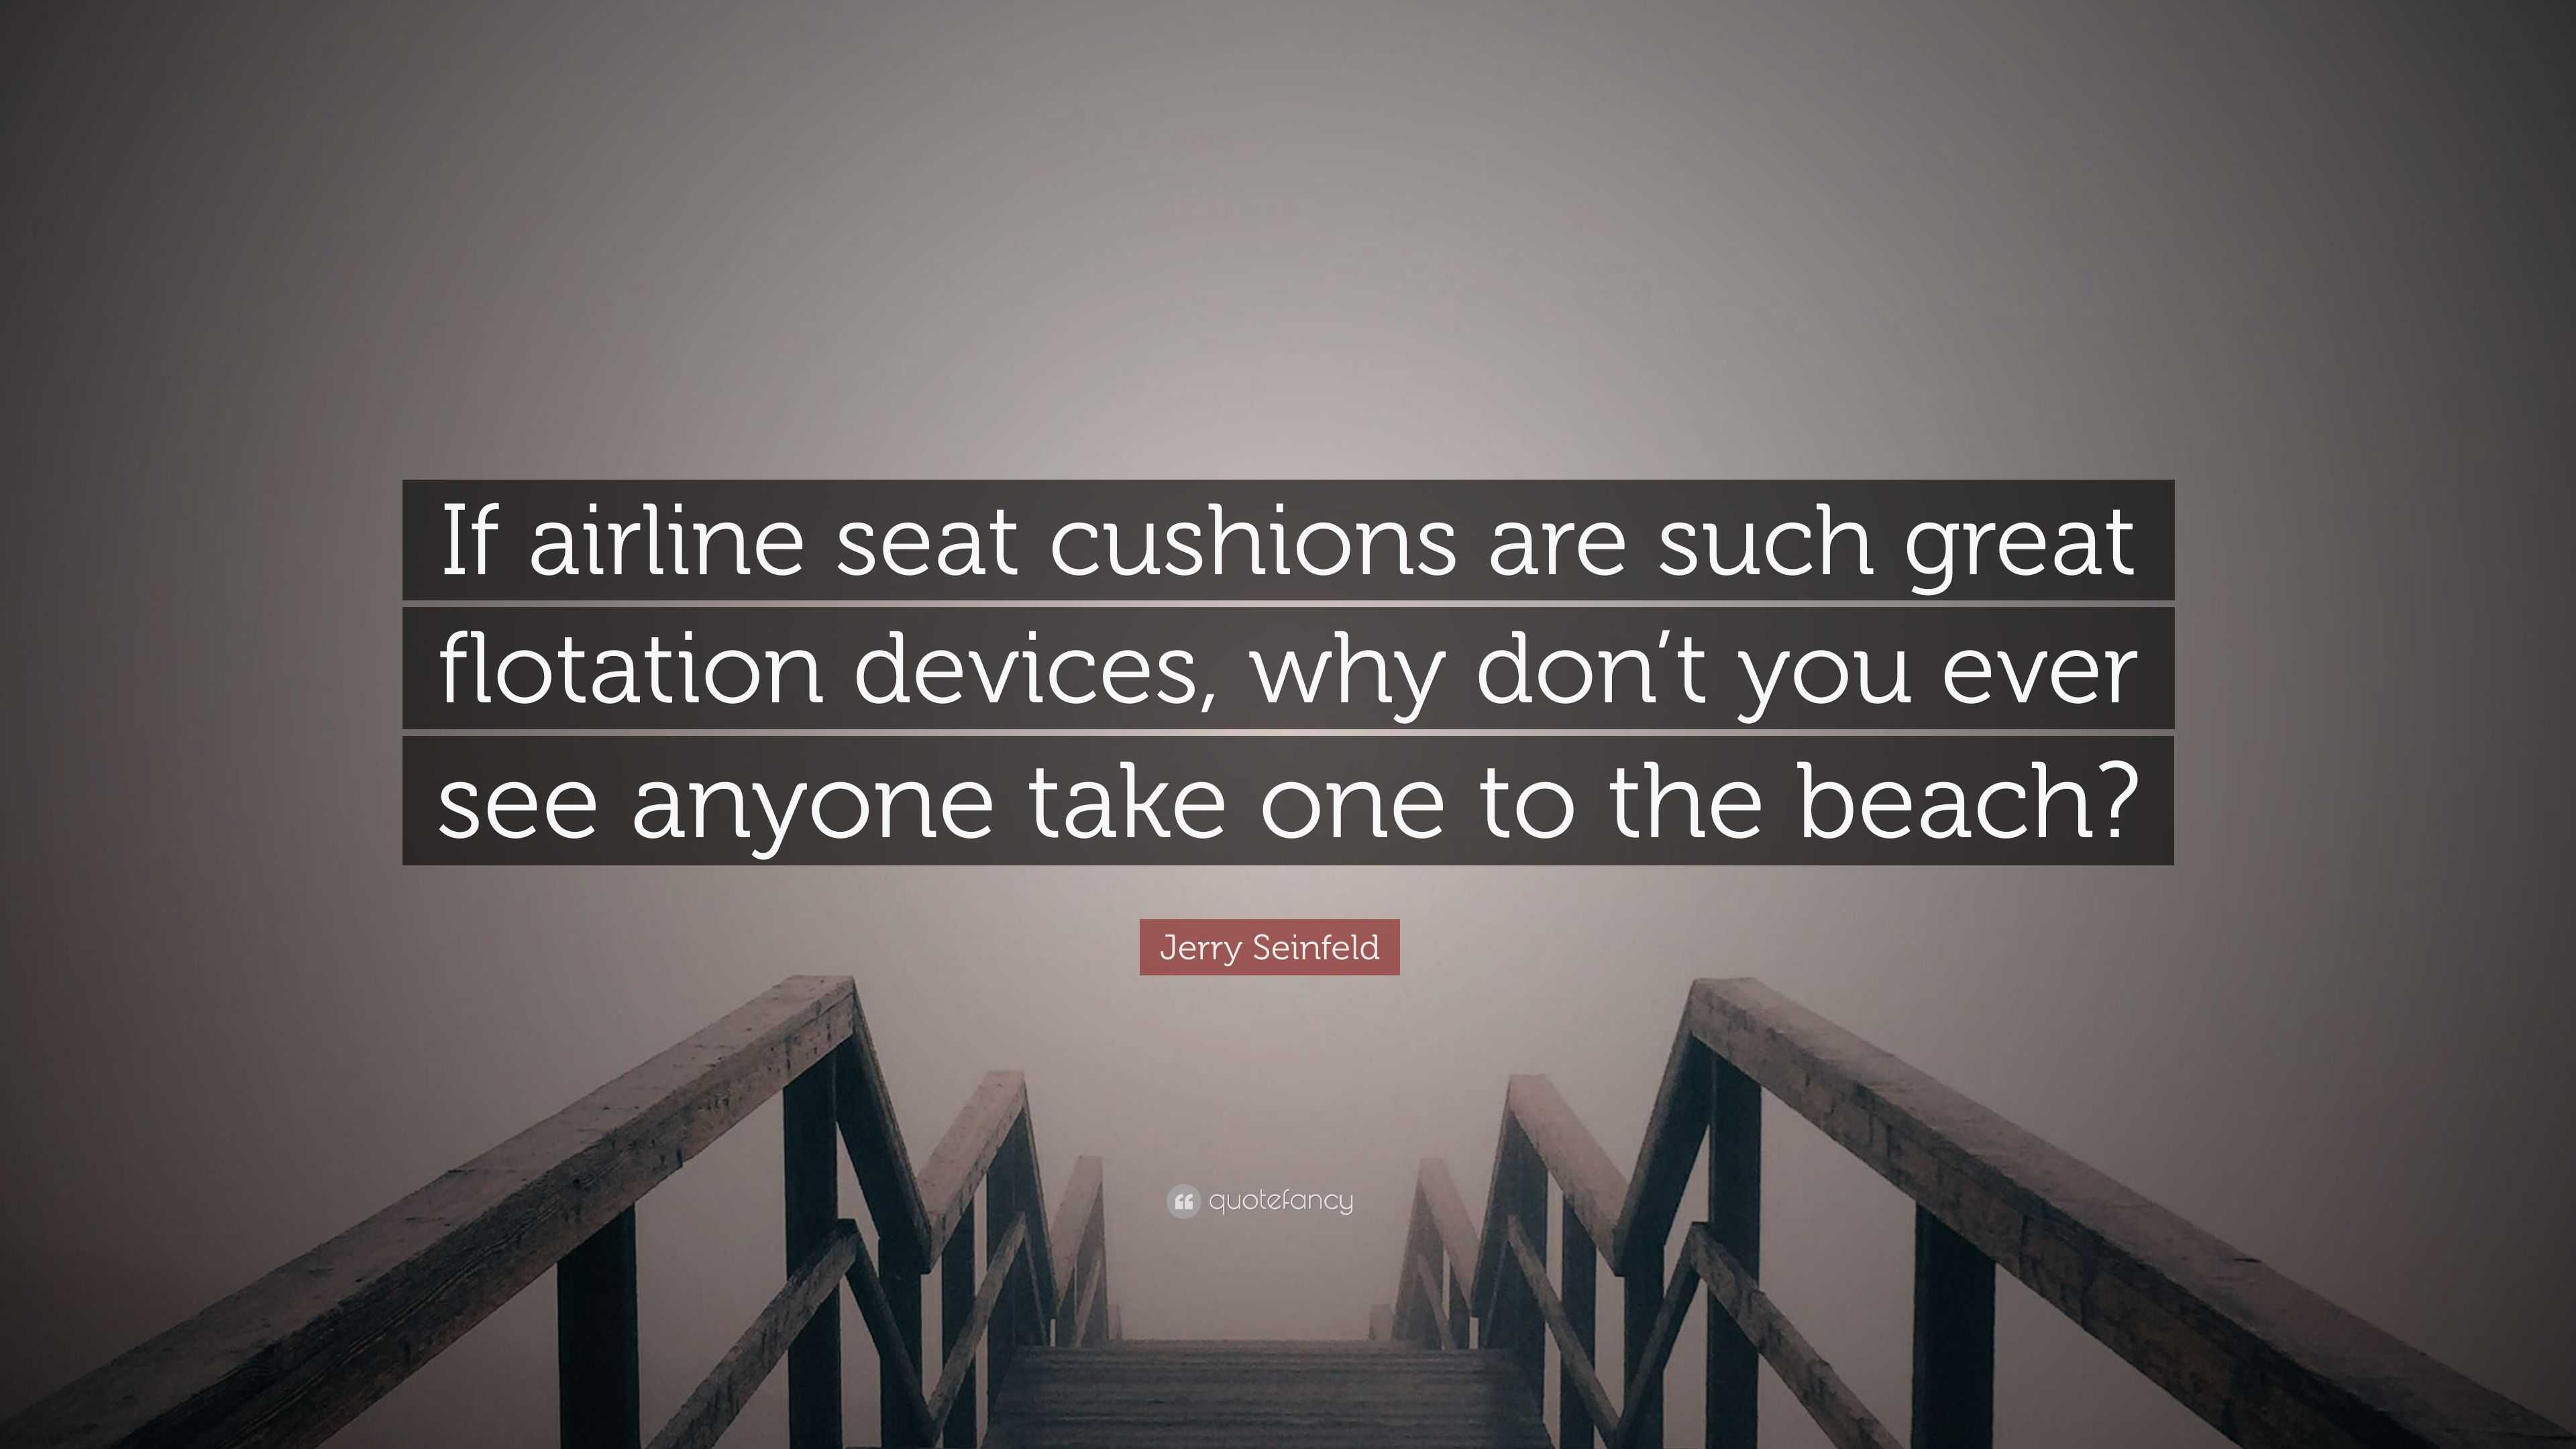 https://quotefancy.com/media/wallpaper/3840x2160/3617854-Jerry-Seinfeld-Quote-If-airline-seat-cushions-are-such-great.jpg